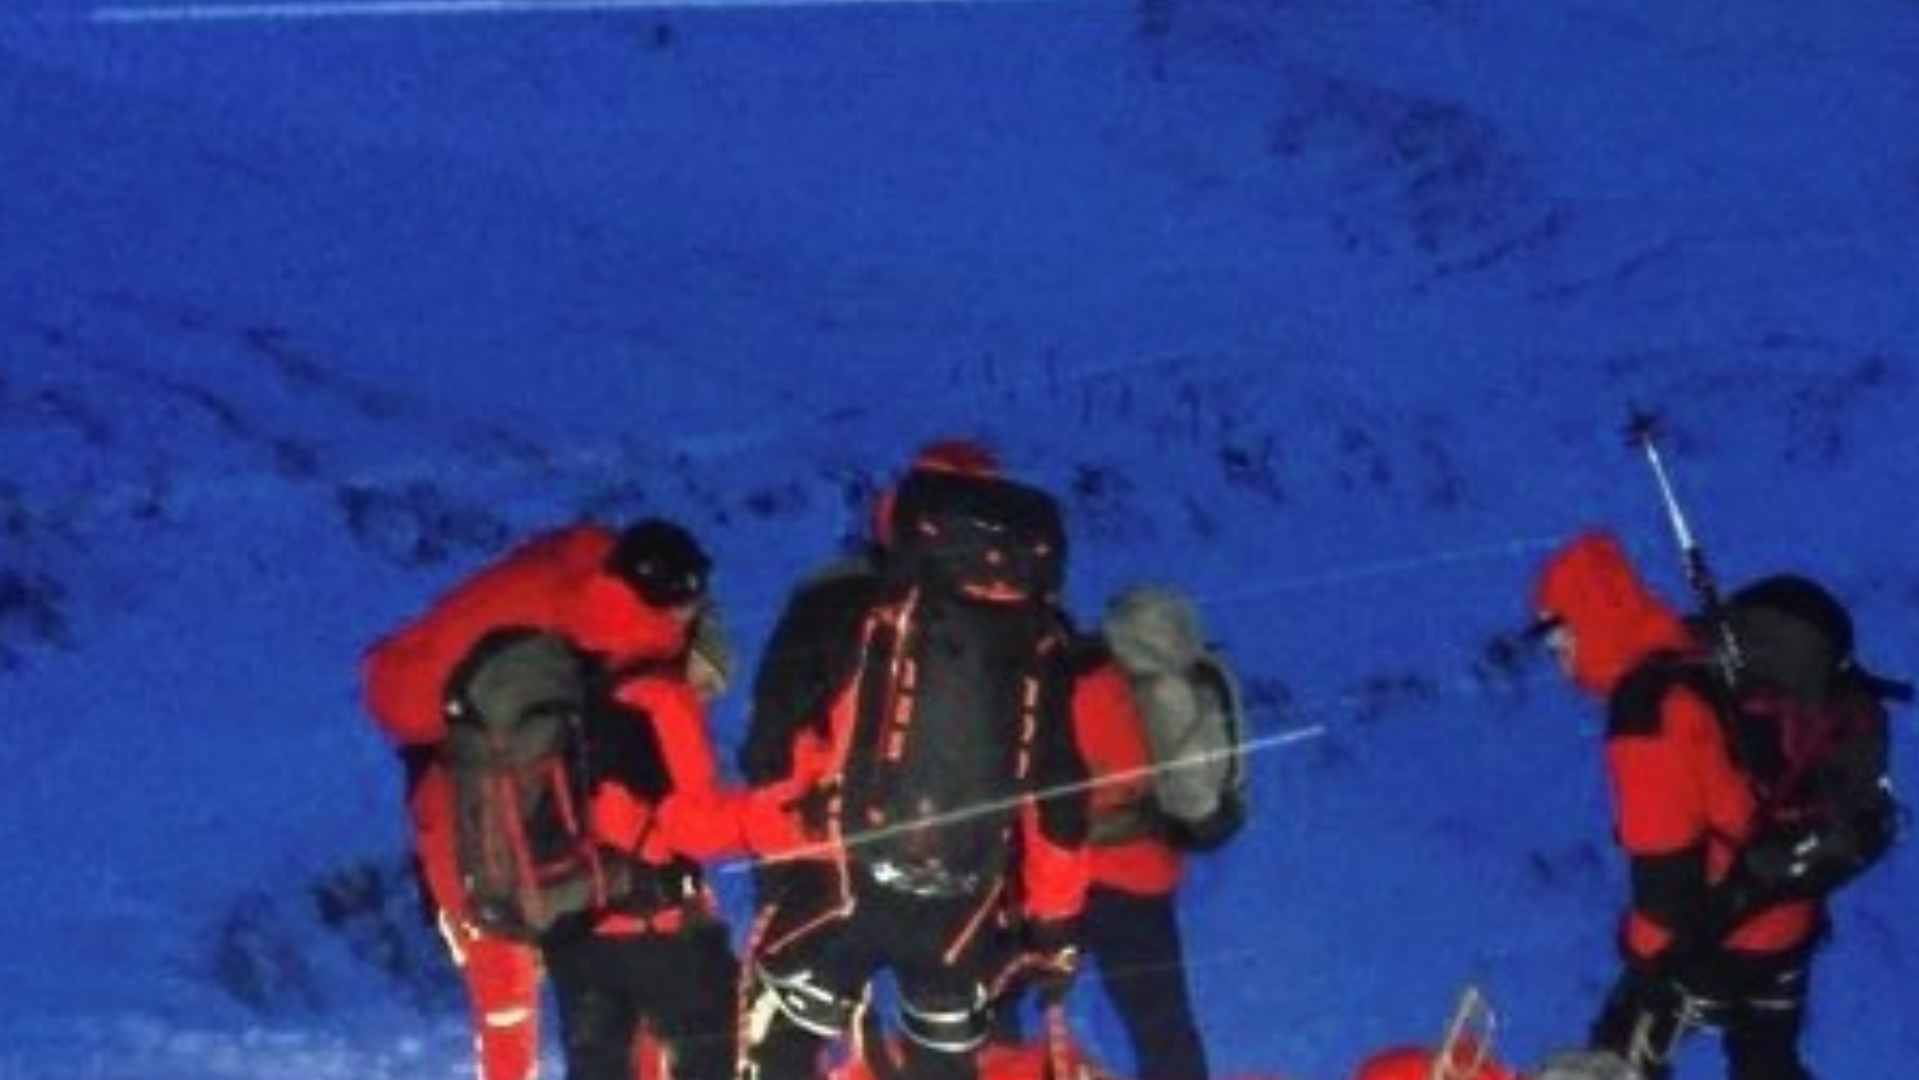 The missing skier was found unharmed in the middle of the night (symbolic image). (Bild: zoom.tirol)